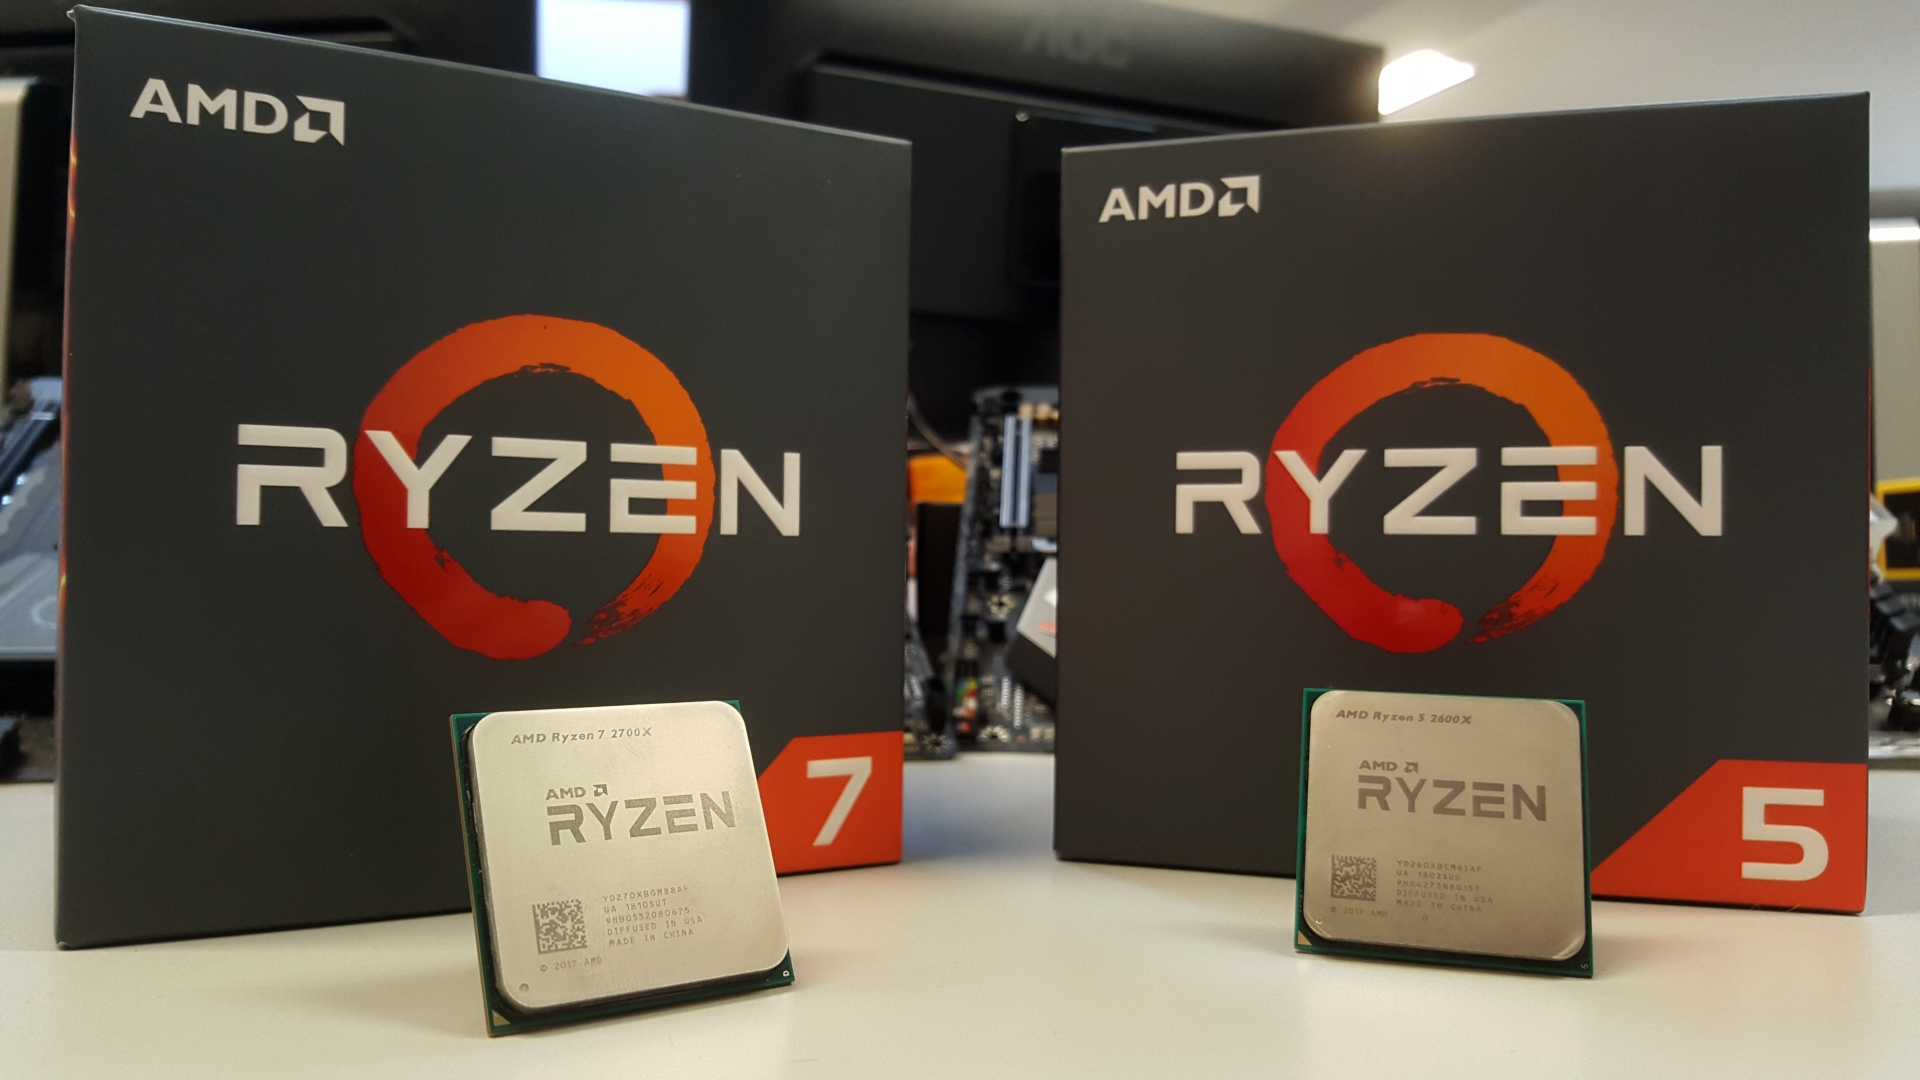 Amd Is Holding Back The Ryzen 7 2800x For The 8 Core Intel Coffee Lake Battle Royale Pcgamesn